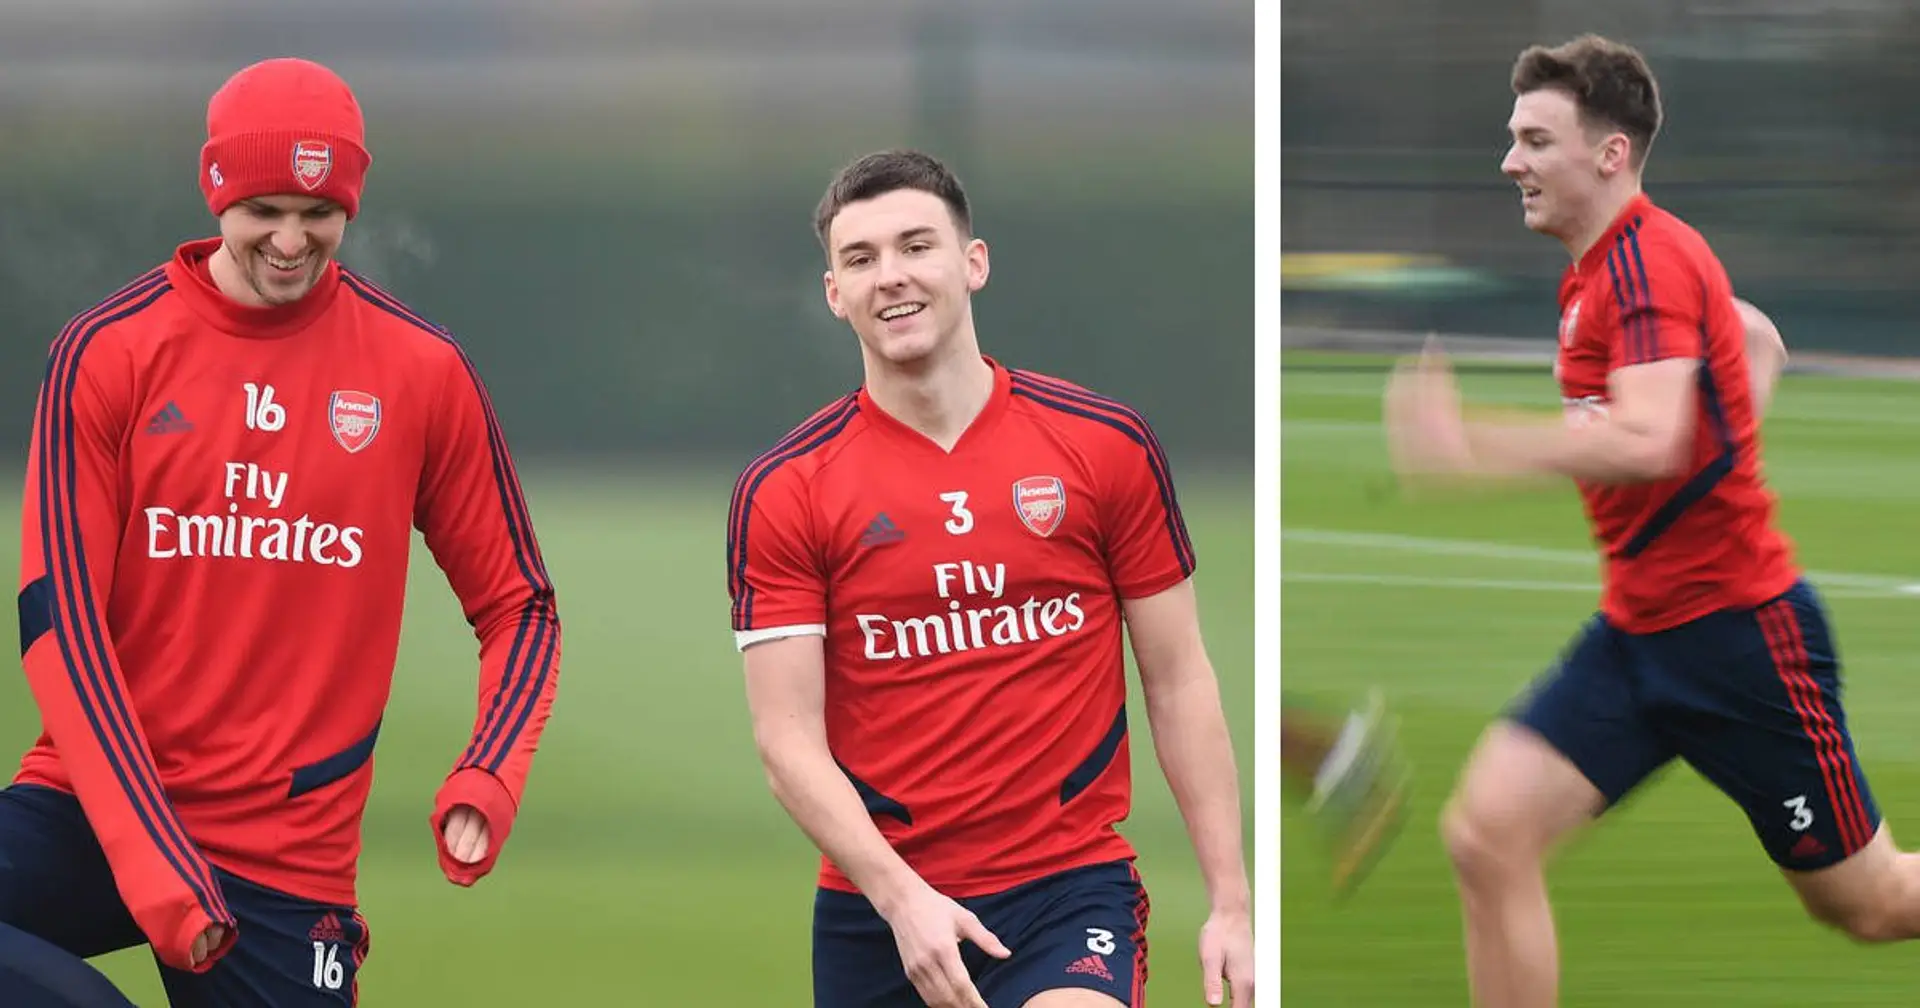 Tierney on his training attire: 'You should see the weather in Scotland, then we'll talk'